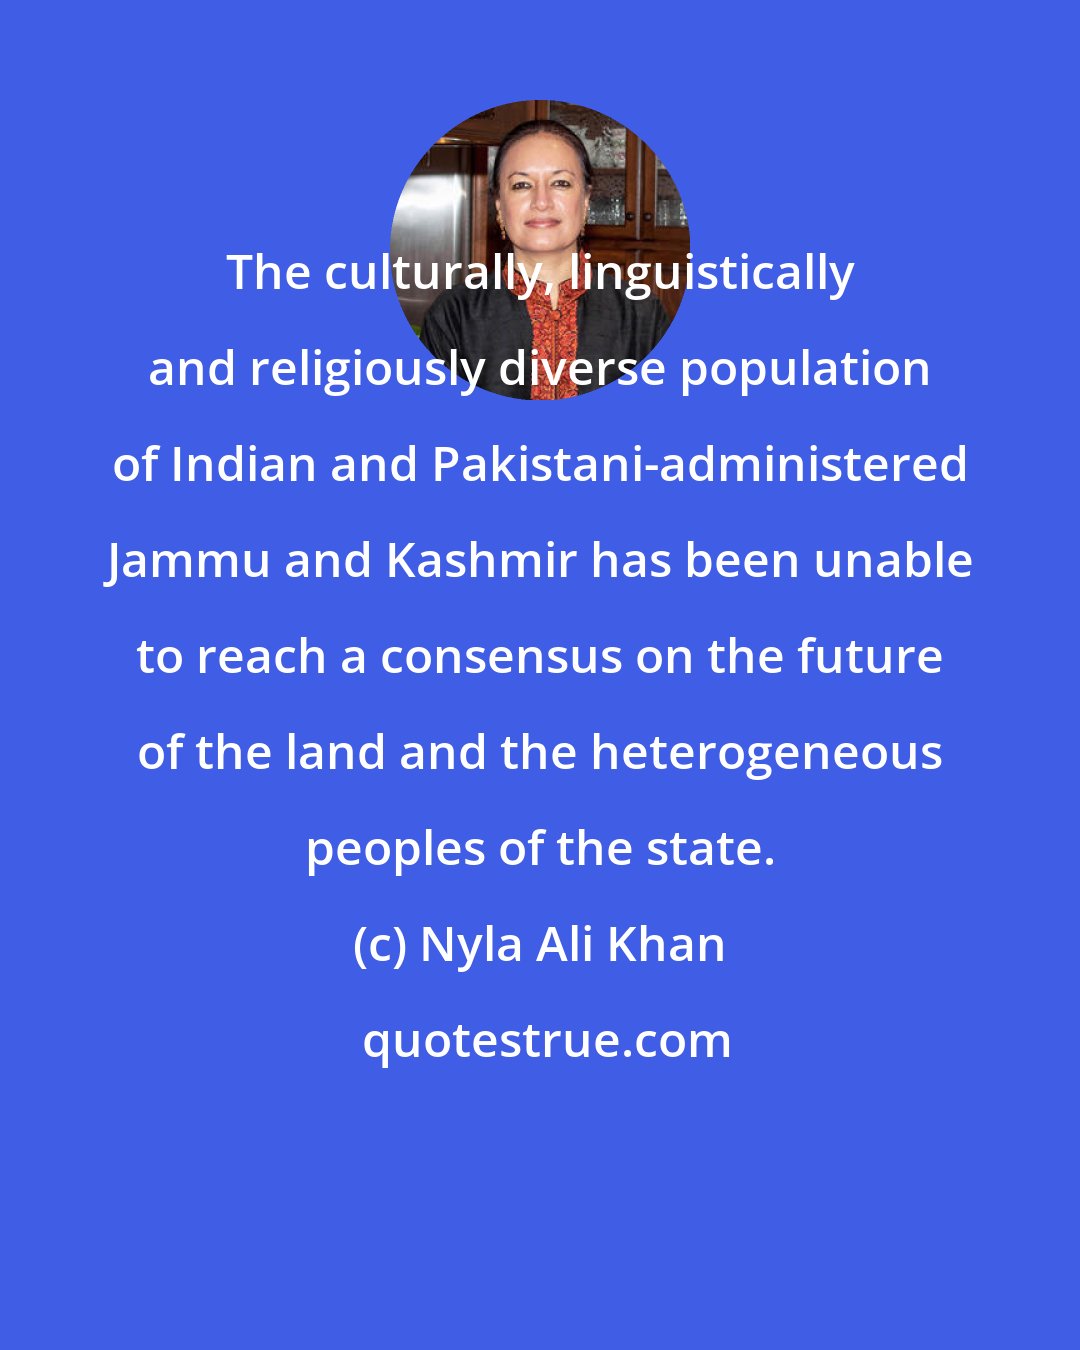 Nyla Ali Khan: The culturally, linguistically and religiously diverse population of Indian and Pakistani-administered Jammu and Kashmir has been unable to reach a consensus on the future of the land and the heterogeneous peoples of the state.